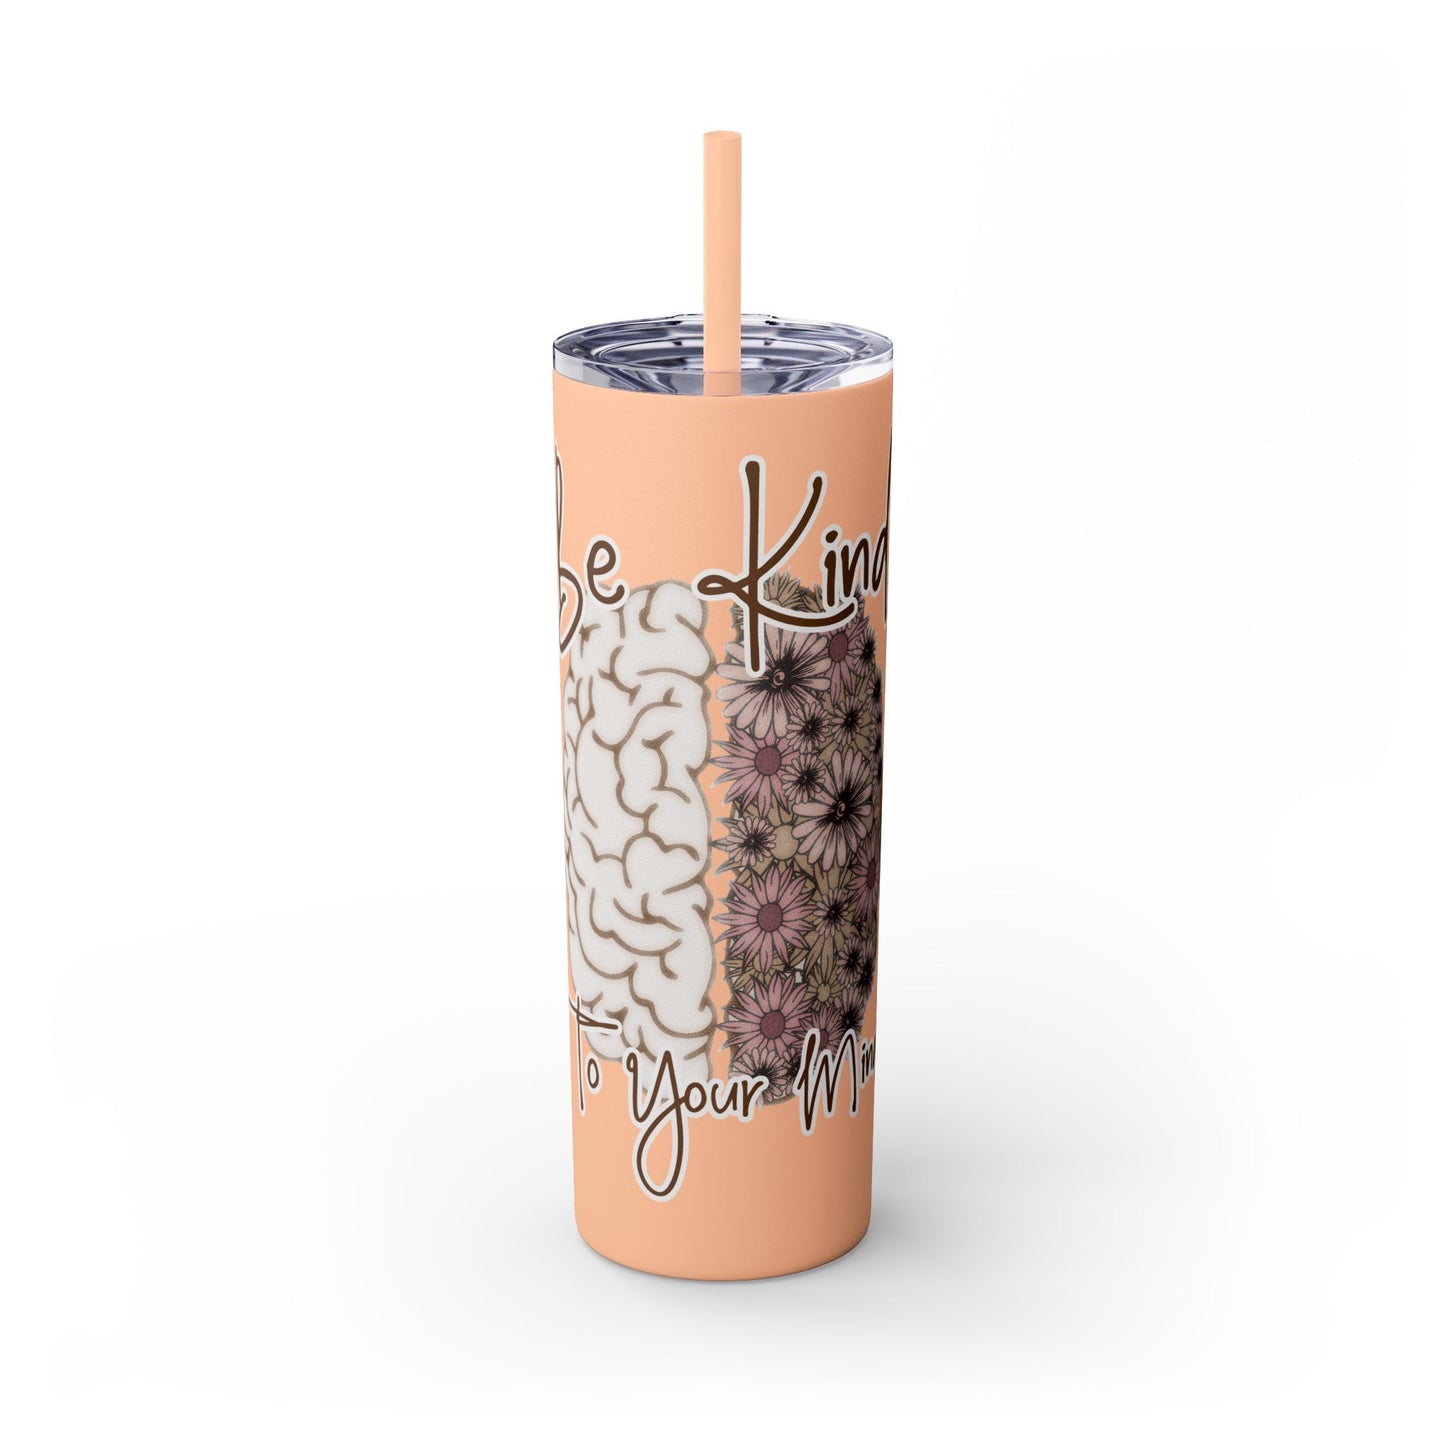 Be Kind to Your Mind - Skinny Tumbler with Straw, 20oz